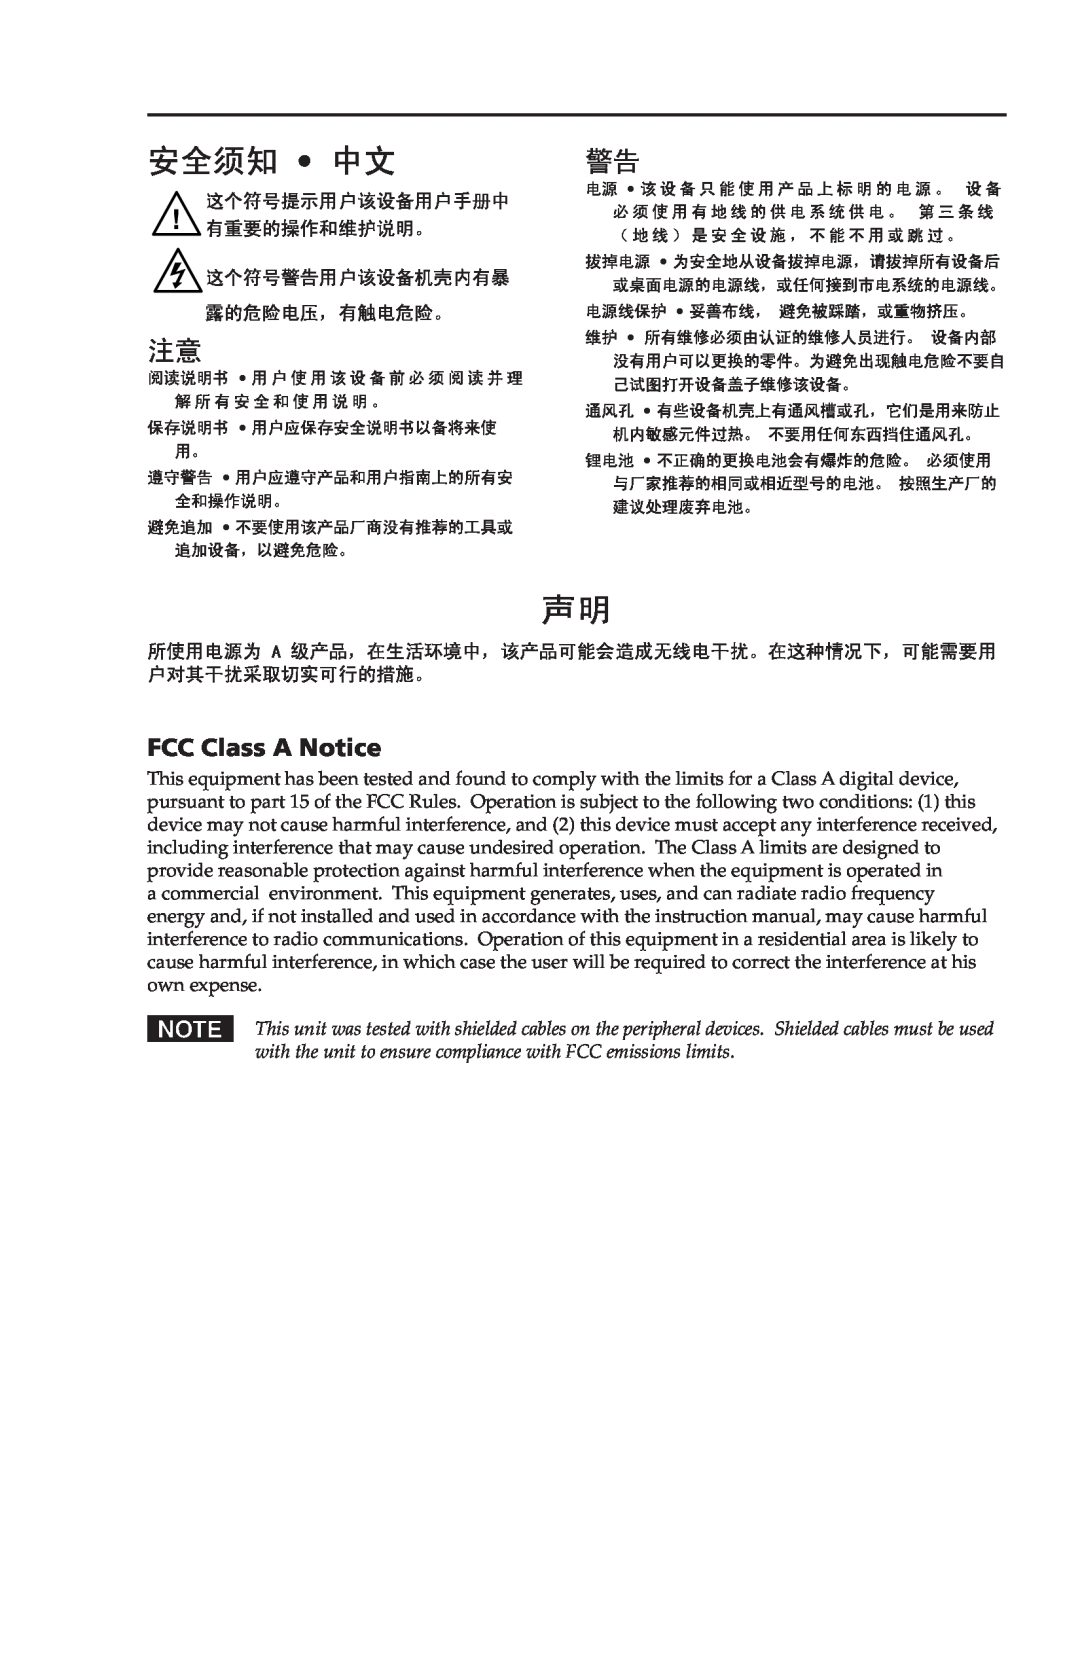 Extron electronic IN3254 user manual FCC Class A Notice, 安全须知 中文 